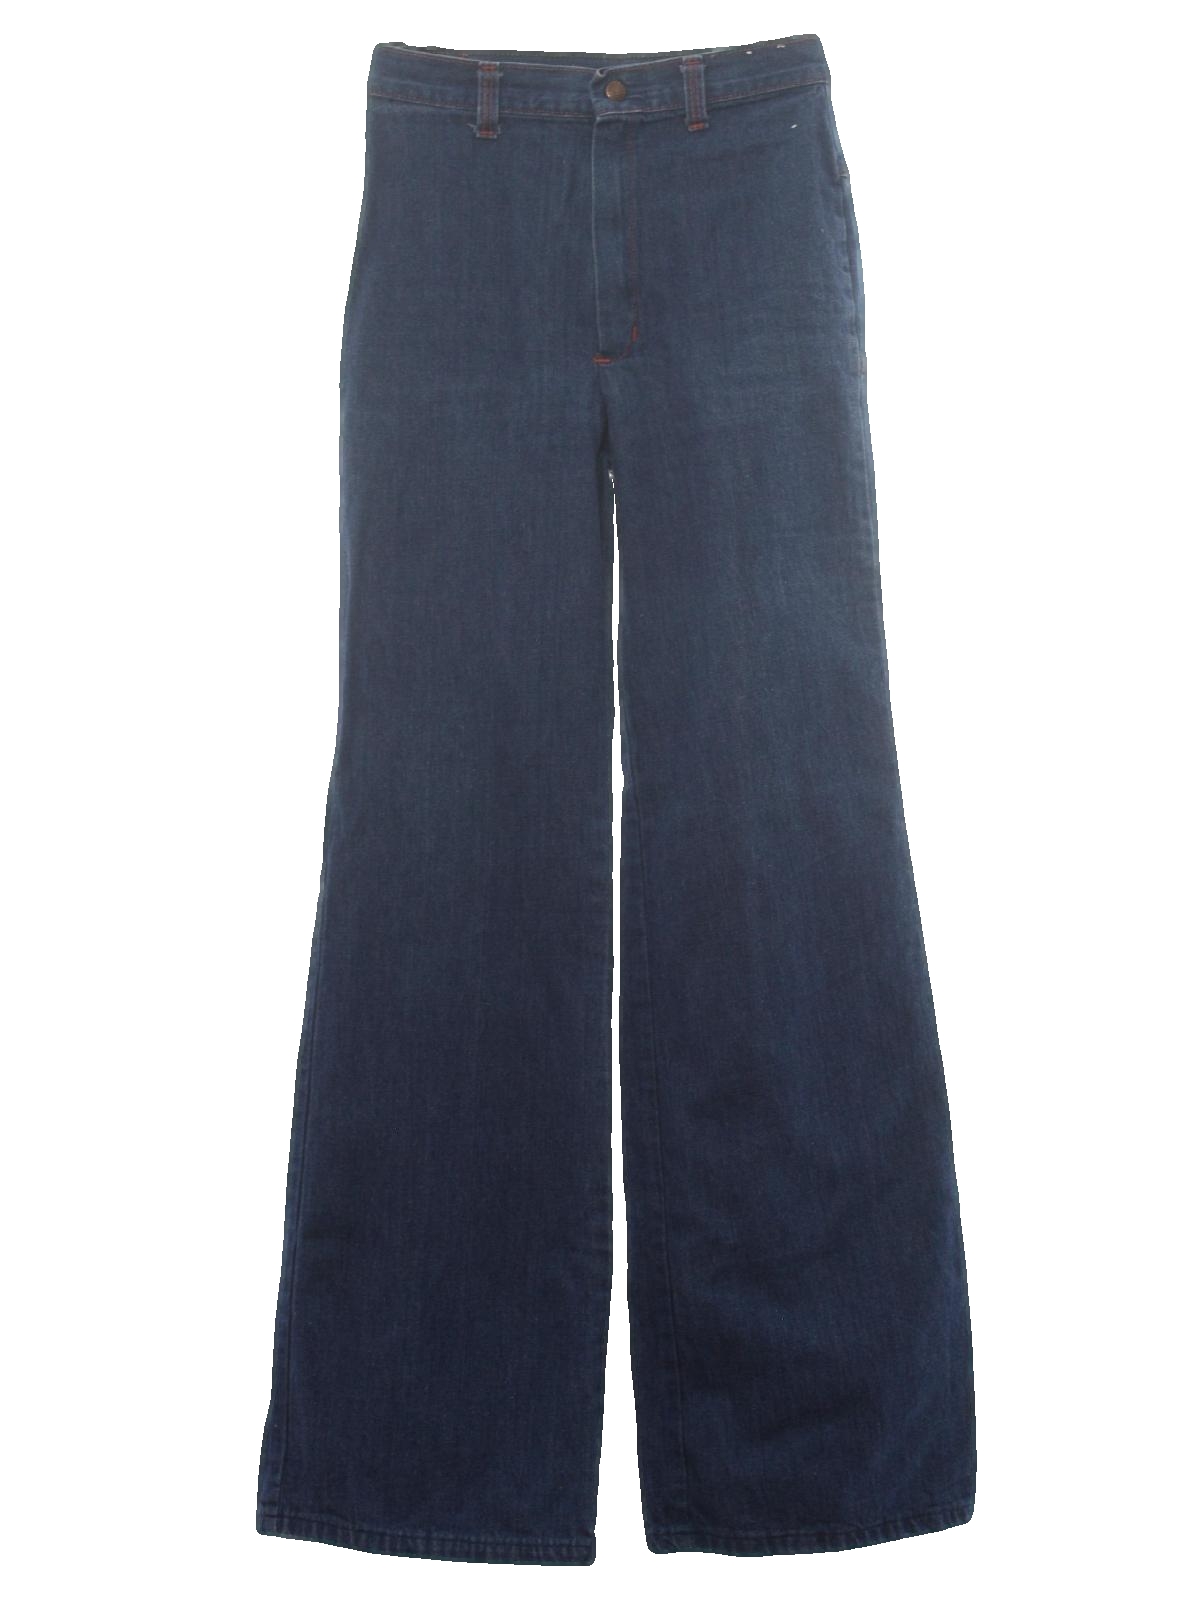 70s Vintage Stuffed Jeans Flared Pants / Flares: Late 70s -Stuffed ...